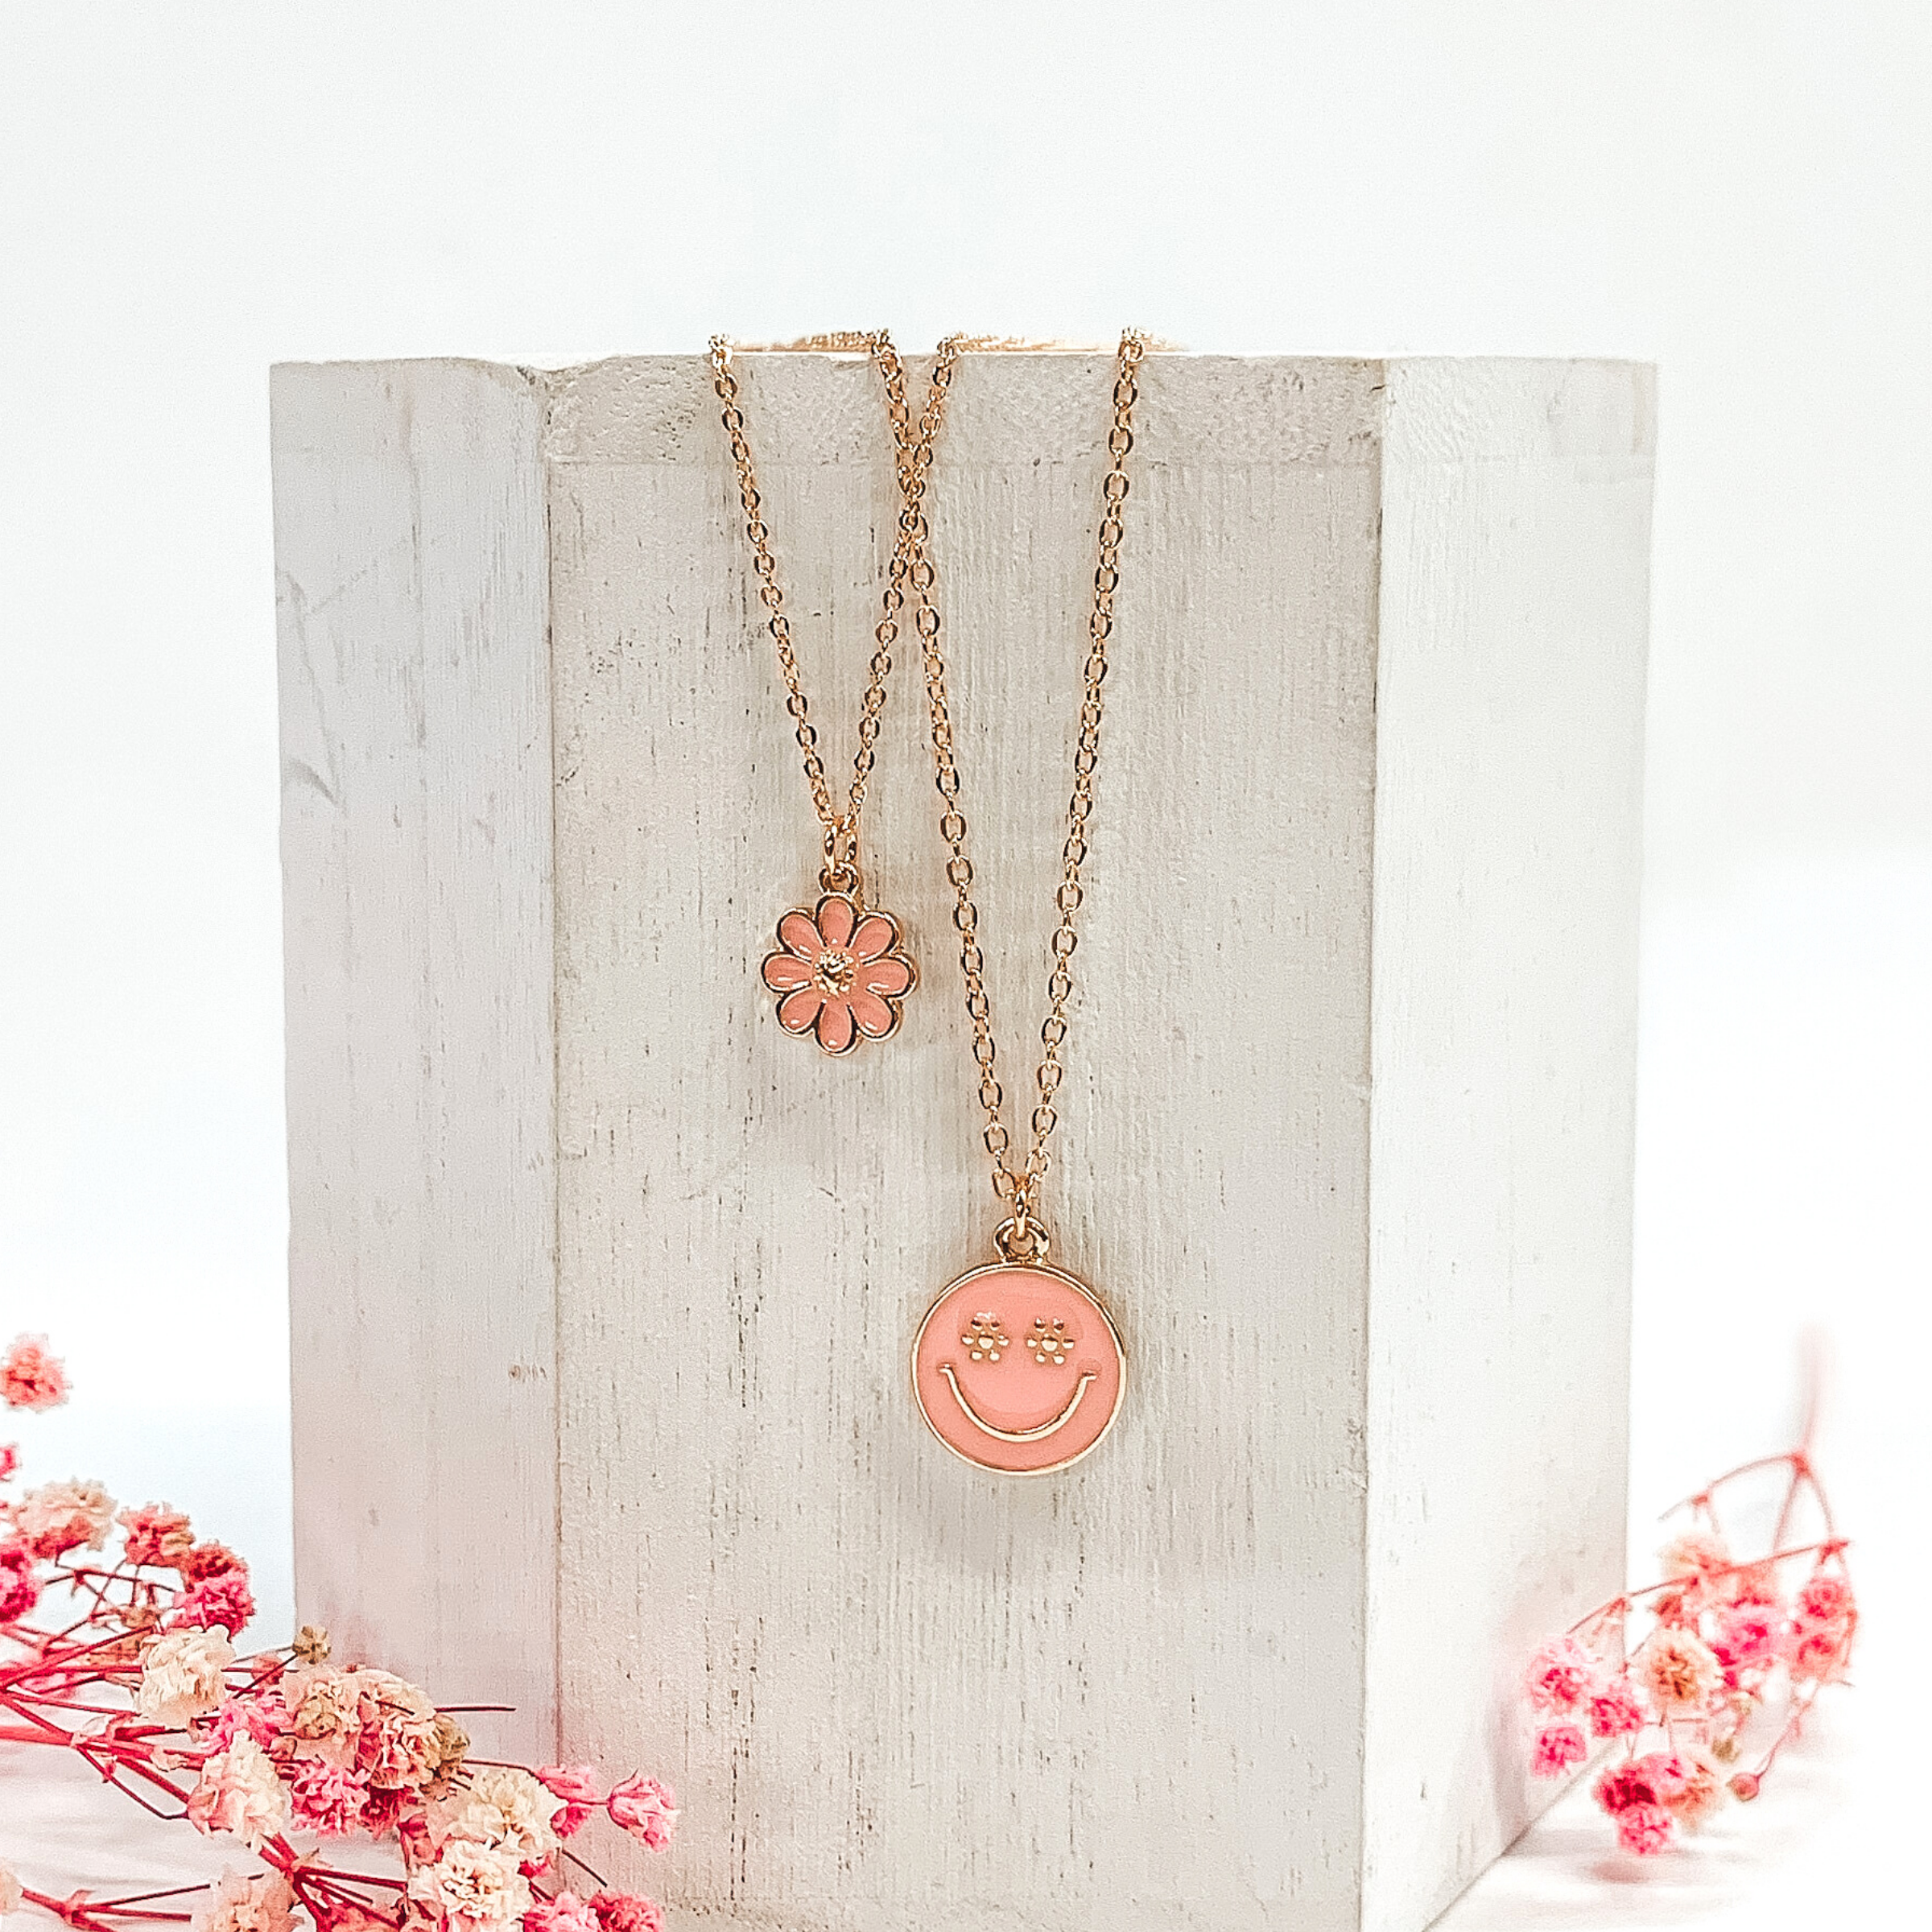 Gold double chained necklace. One strand has a baby pink flower pendant and the other strand is longer and has a baby pink circle pendant with a gold smiley face. This necklace is pictured laying on a white block on a white background with pink baby breath flowers at the bottom of the picture. 